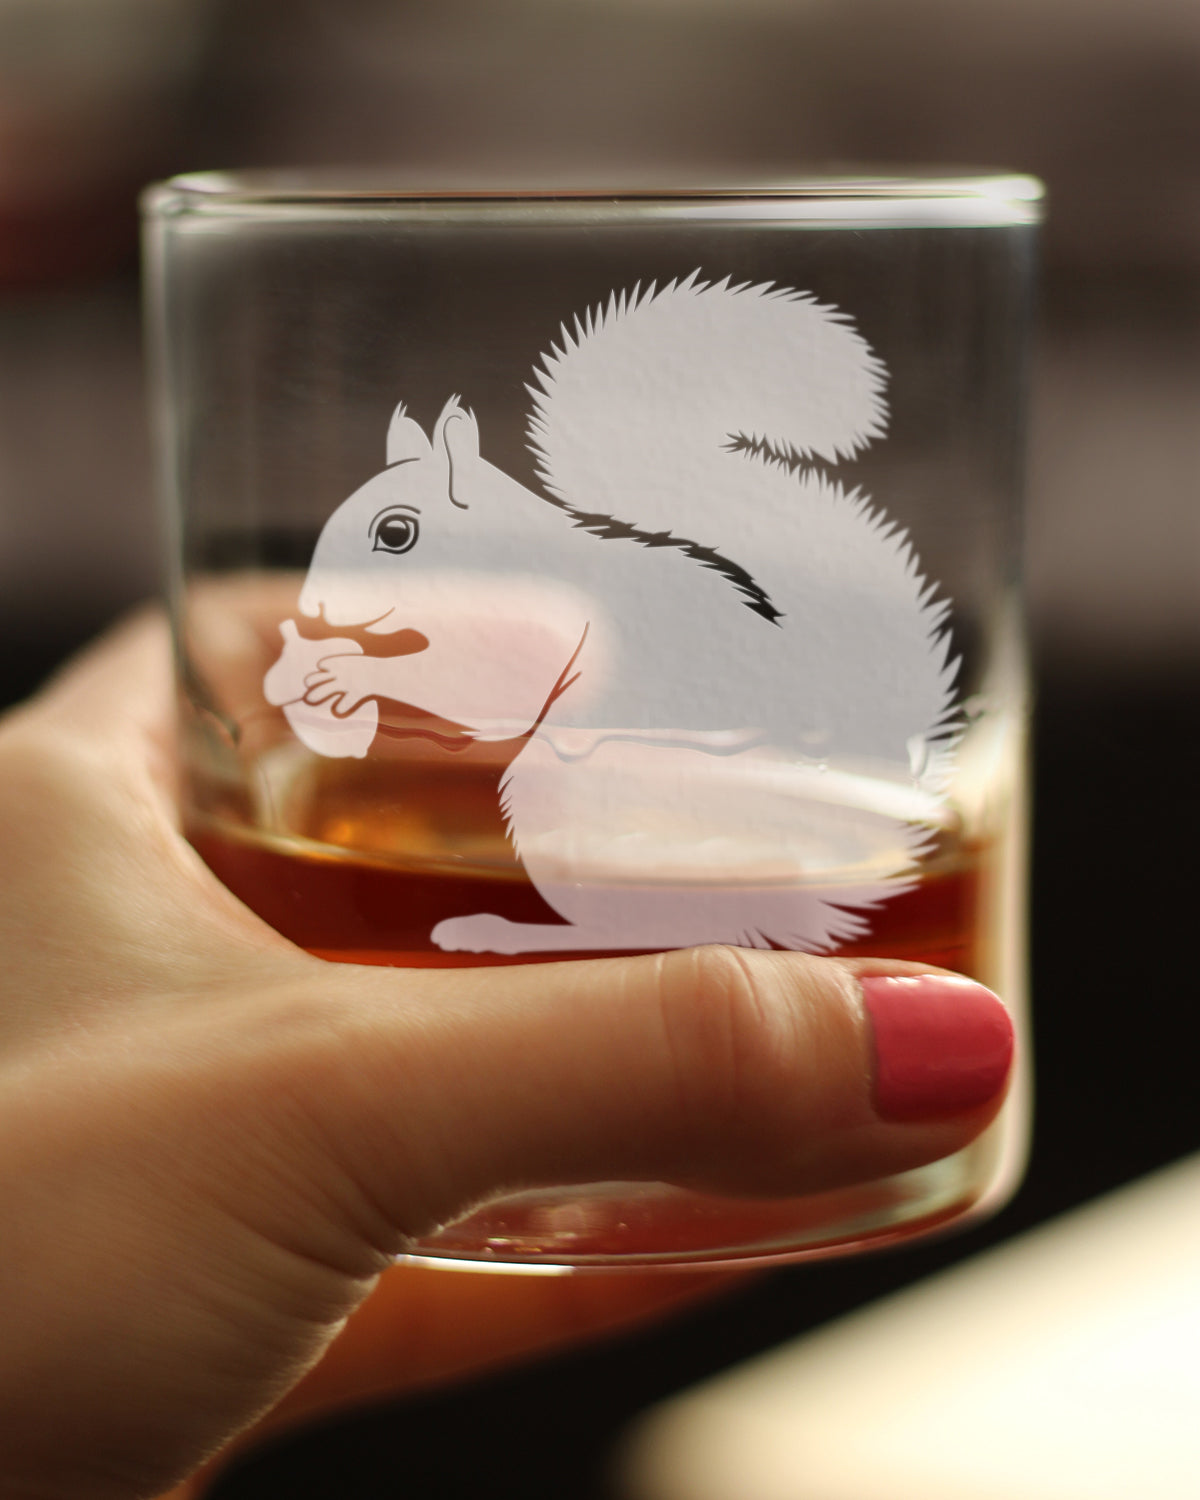 Squirrel Rocks Glass - Squirrel Gifts and Decor with Squirrels - 10.25 Oz Glasses